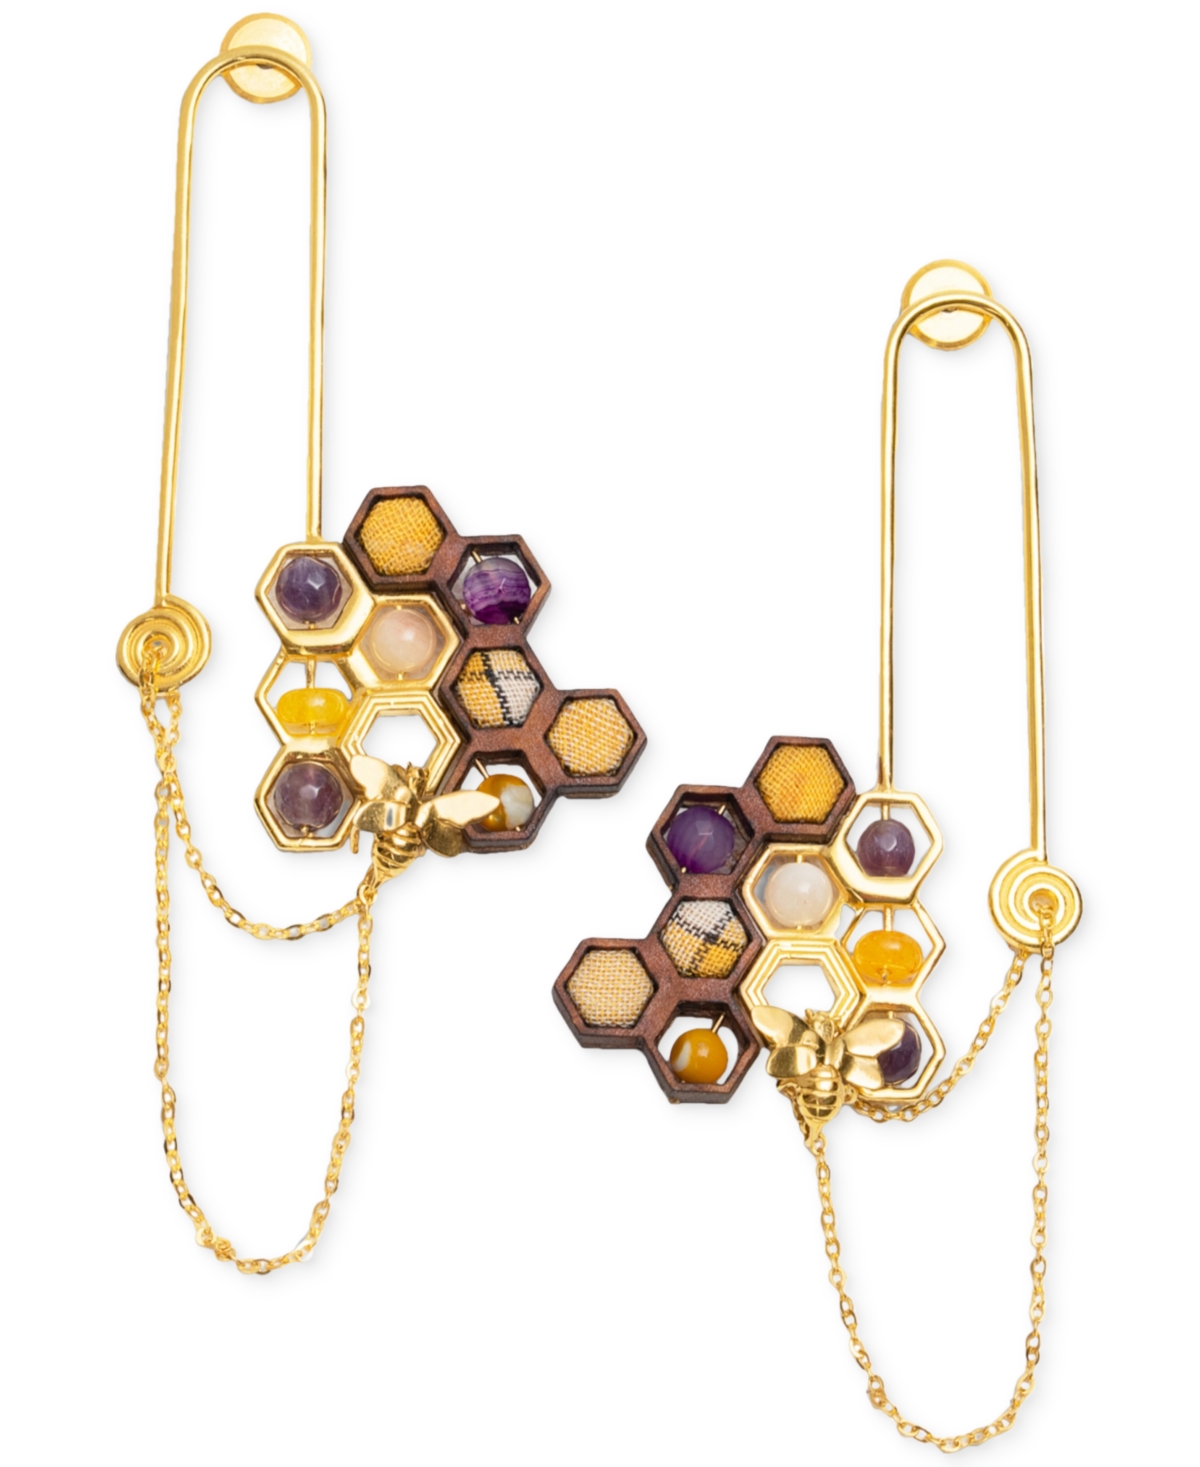 18k Gold-Plated Mixed Gemstone Honeycomb & Chain Drop Earrings - Yw Gld